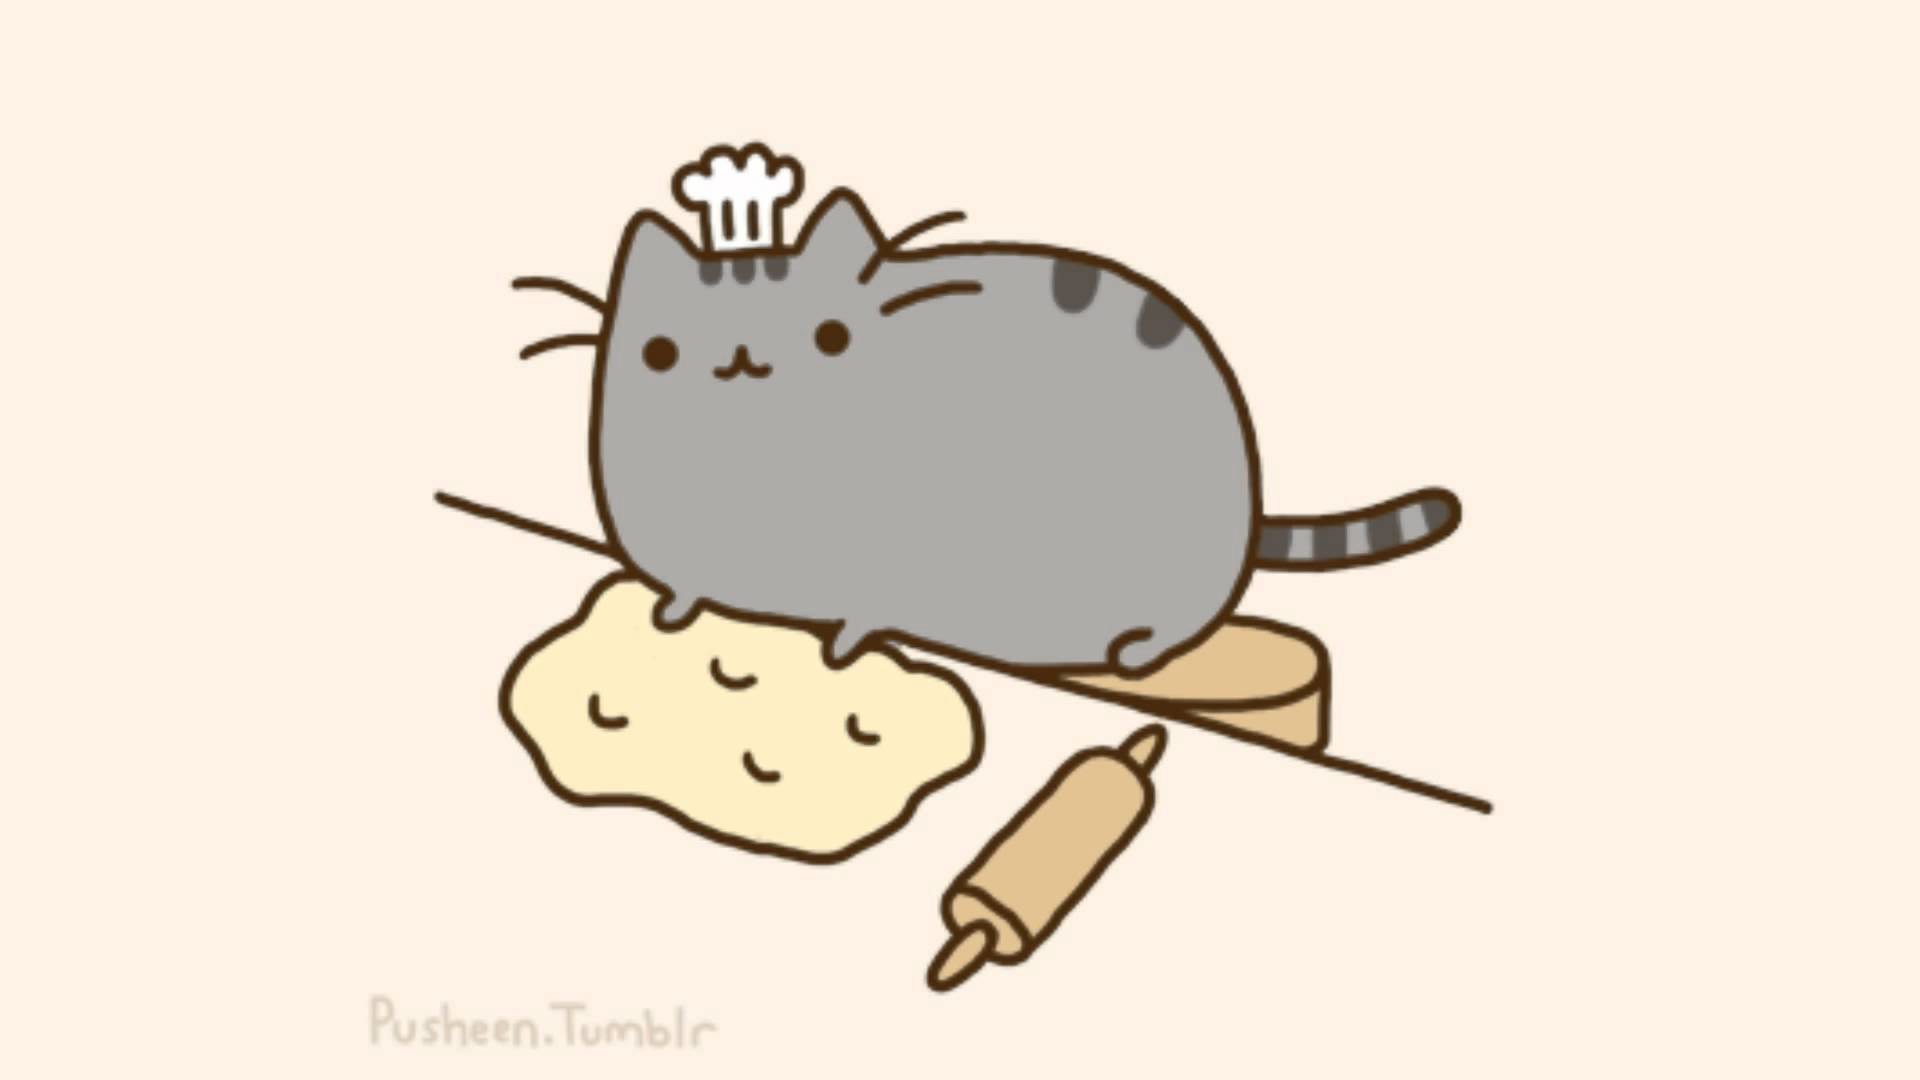 Pusheen The Cat Background Images Pictures – Becuo